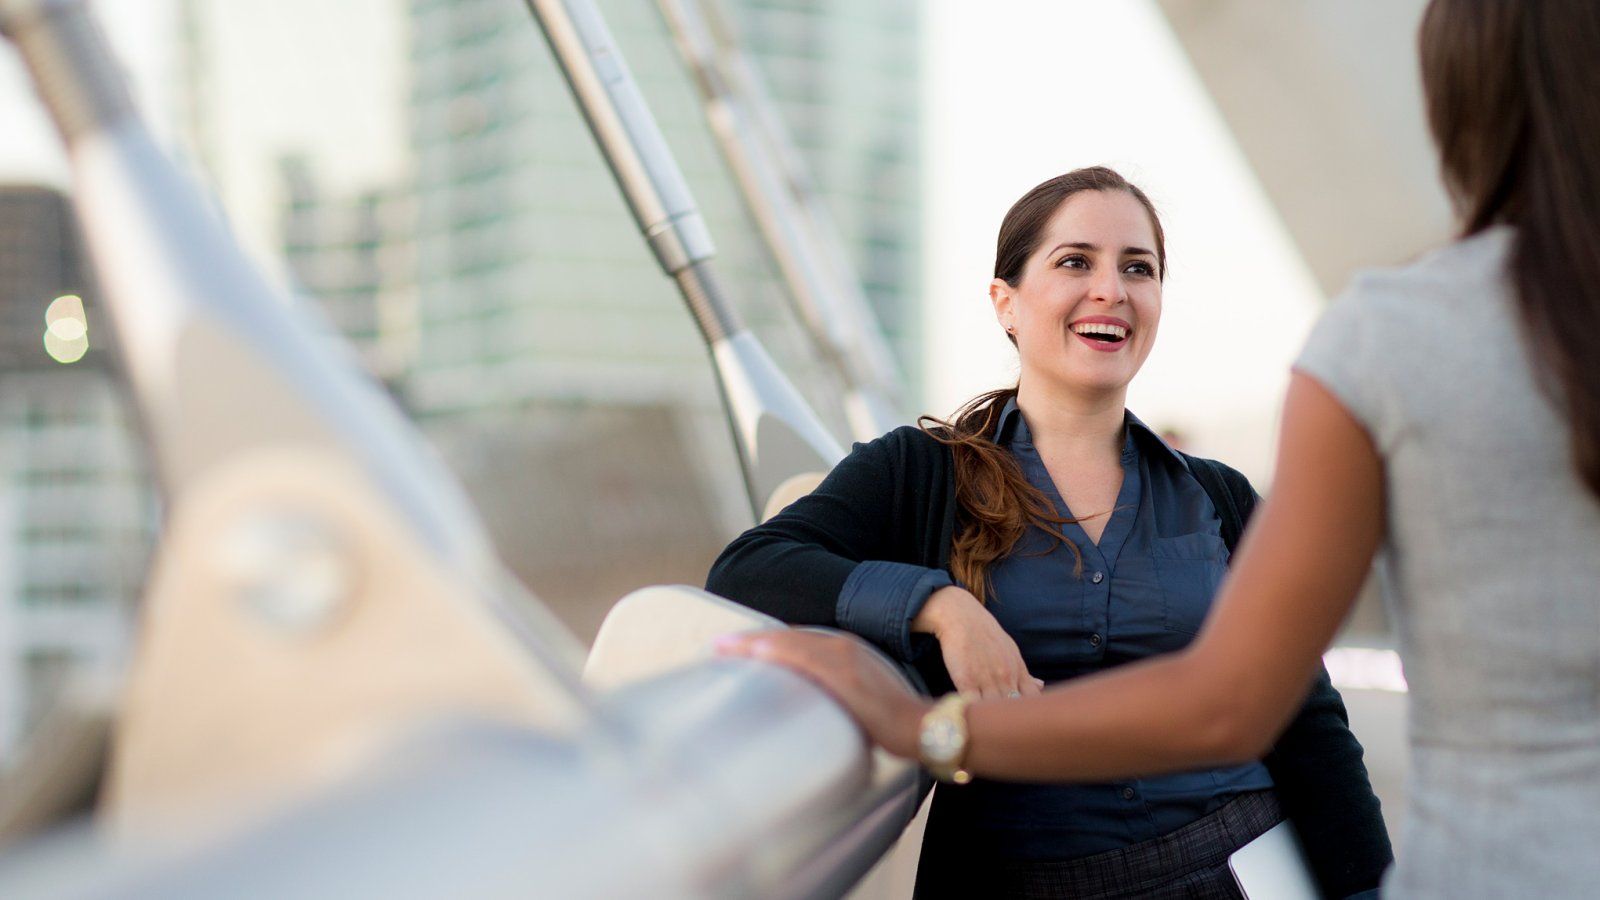 Woman converses with another woman on a pedestrian bridge